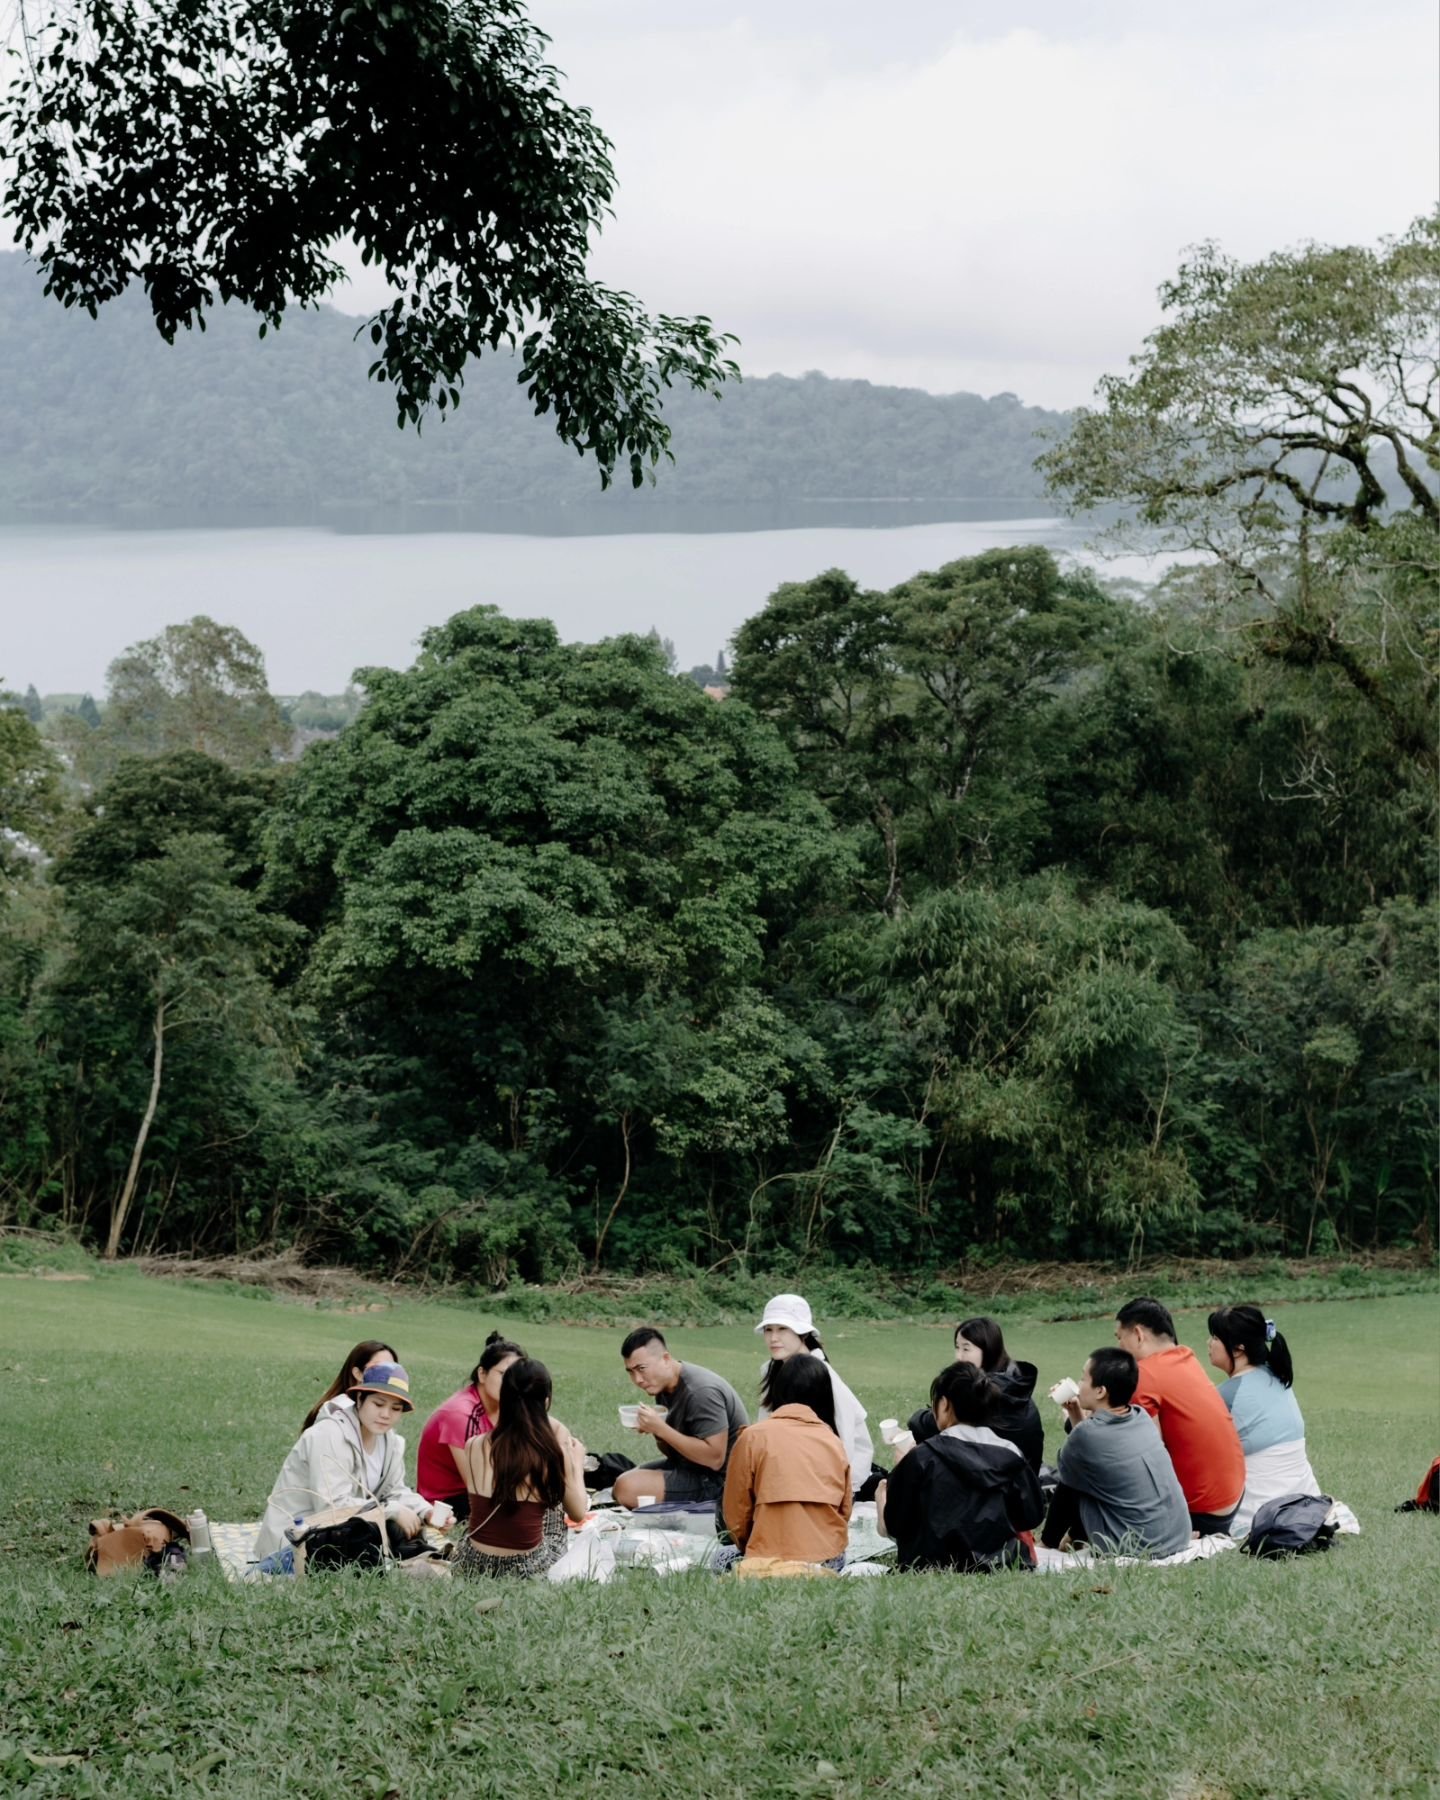 Gentle Retreat in Bali is an immersive 4D3N experience in nature that offers a deeper exploration of the forest bathing practice. You will be co-living among a group of gentle strangers in a riverside glamping resort, be nourished by fresh organic fo